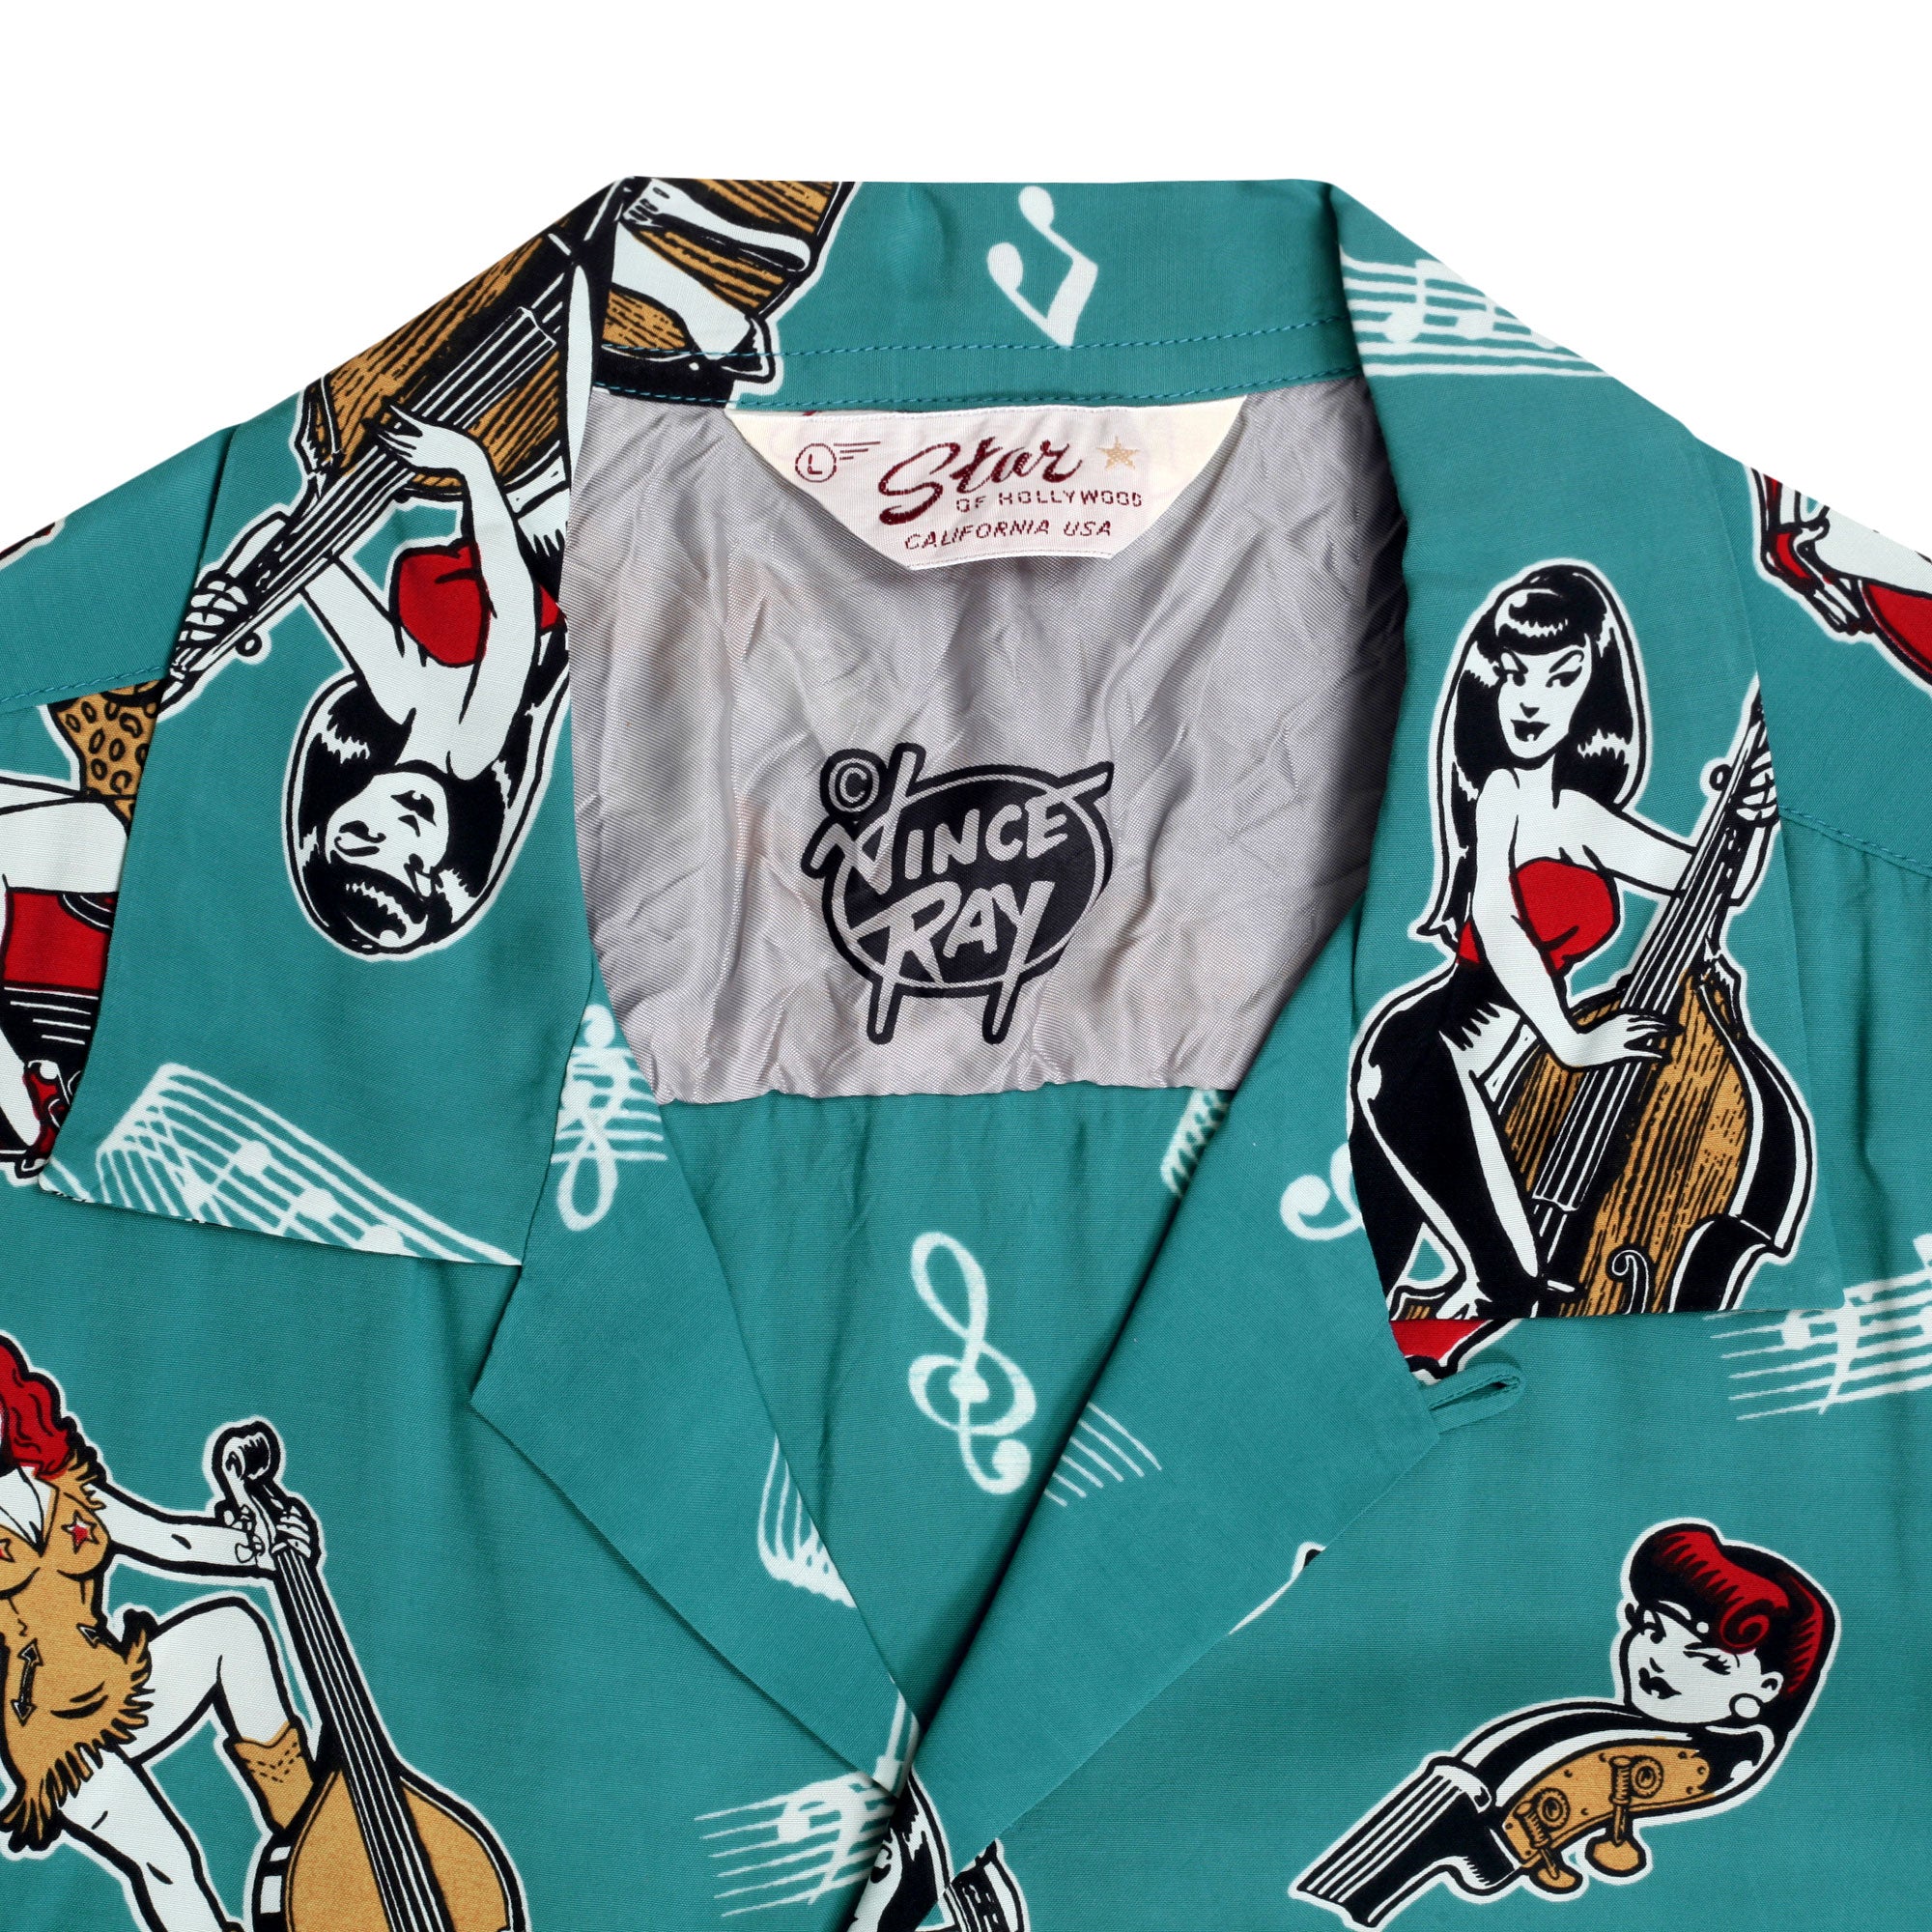 Hawaiian Shirt Size Xlarge Blue With Pinup Girls Made by 